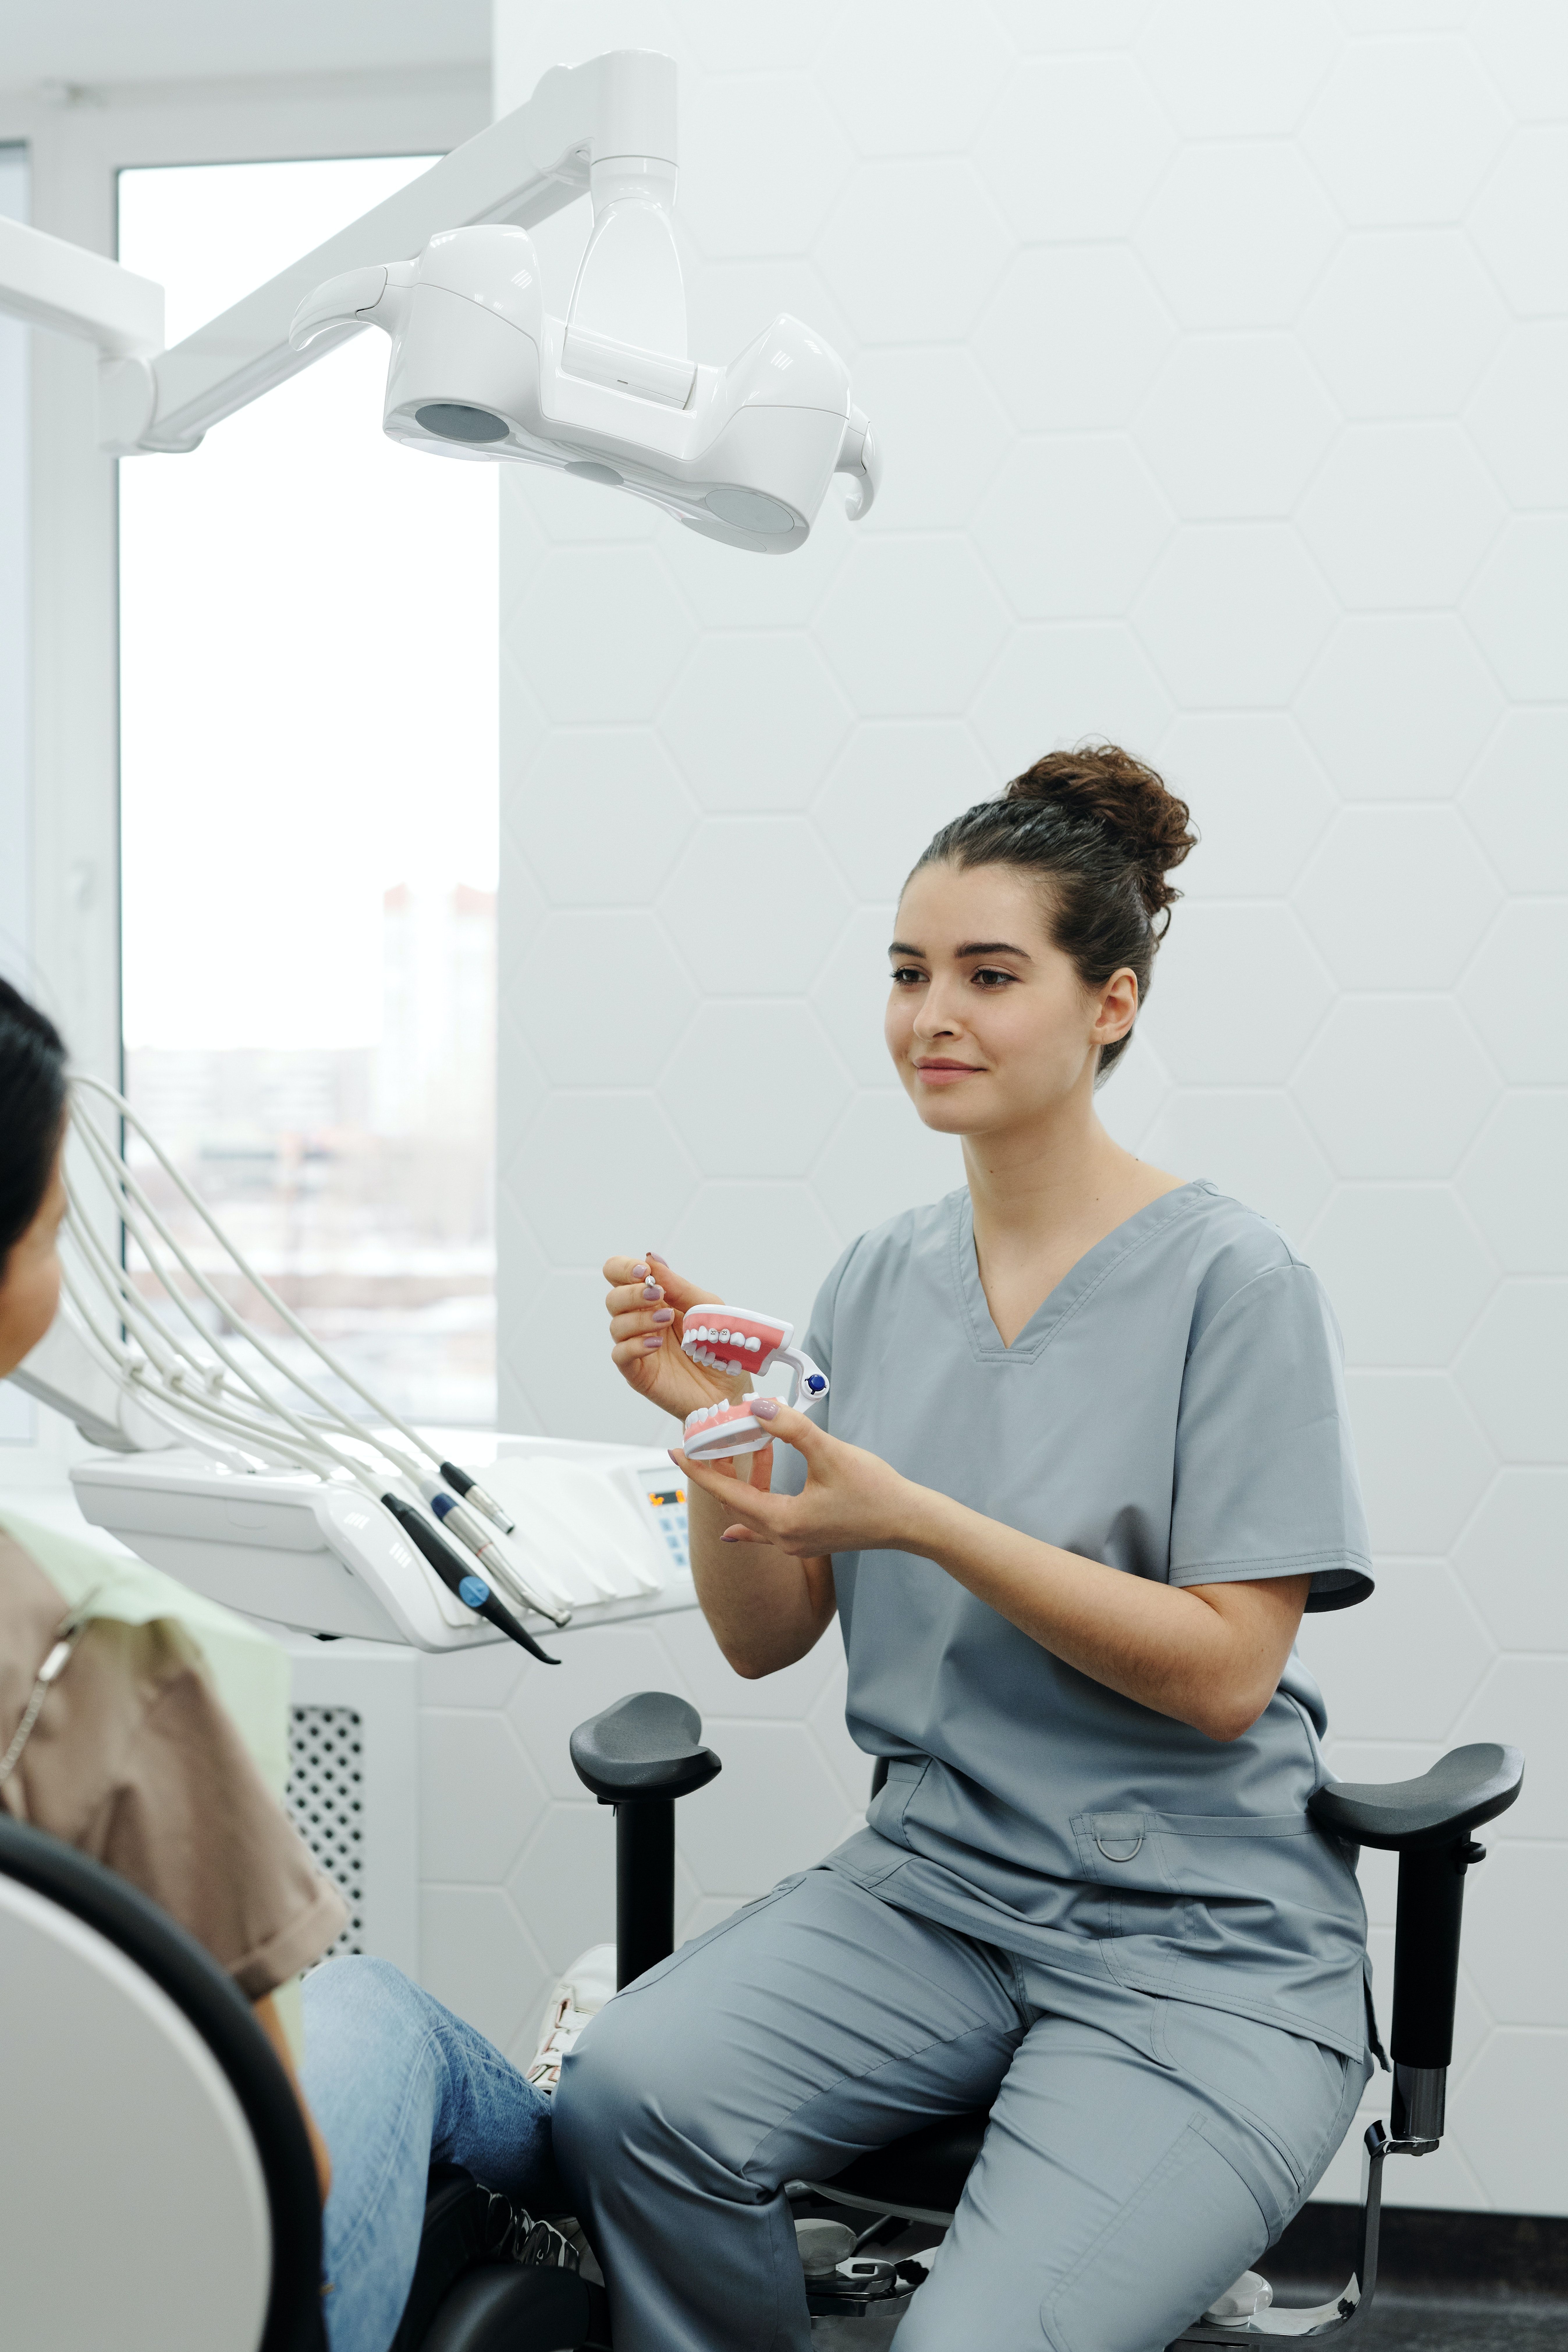 This is why endodontic diagnosis begins with the dental hygienist